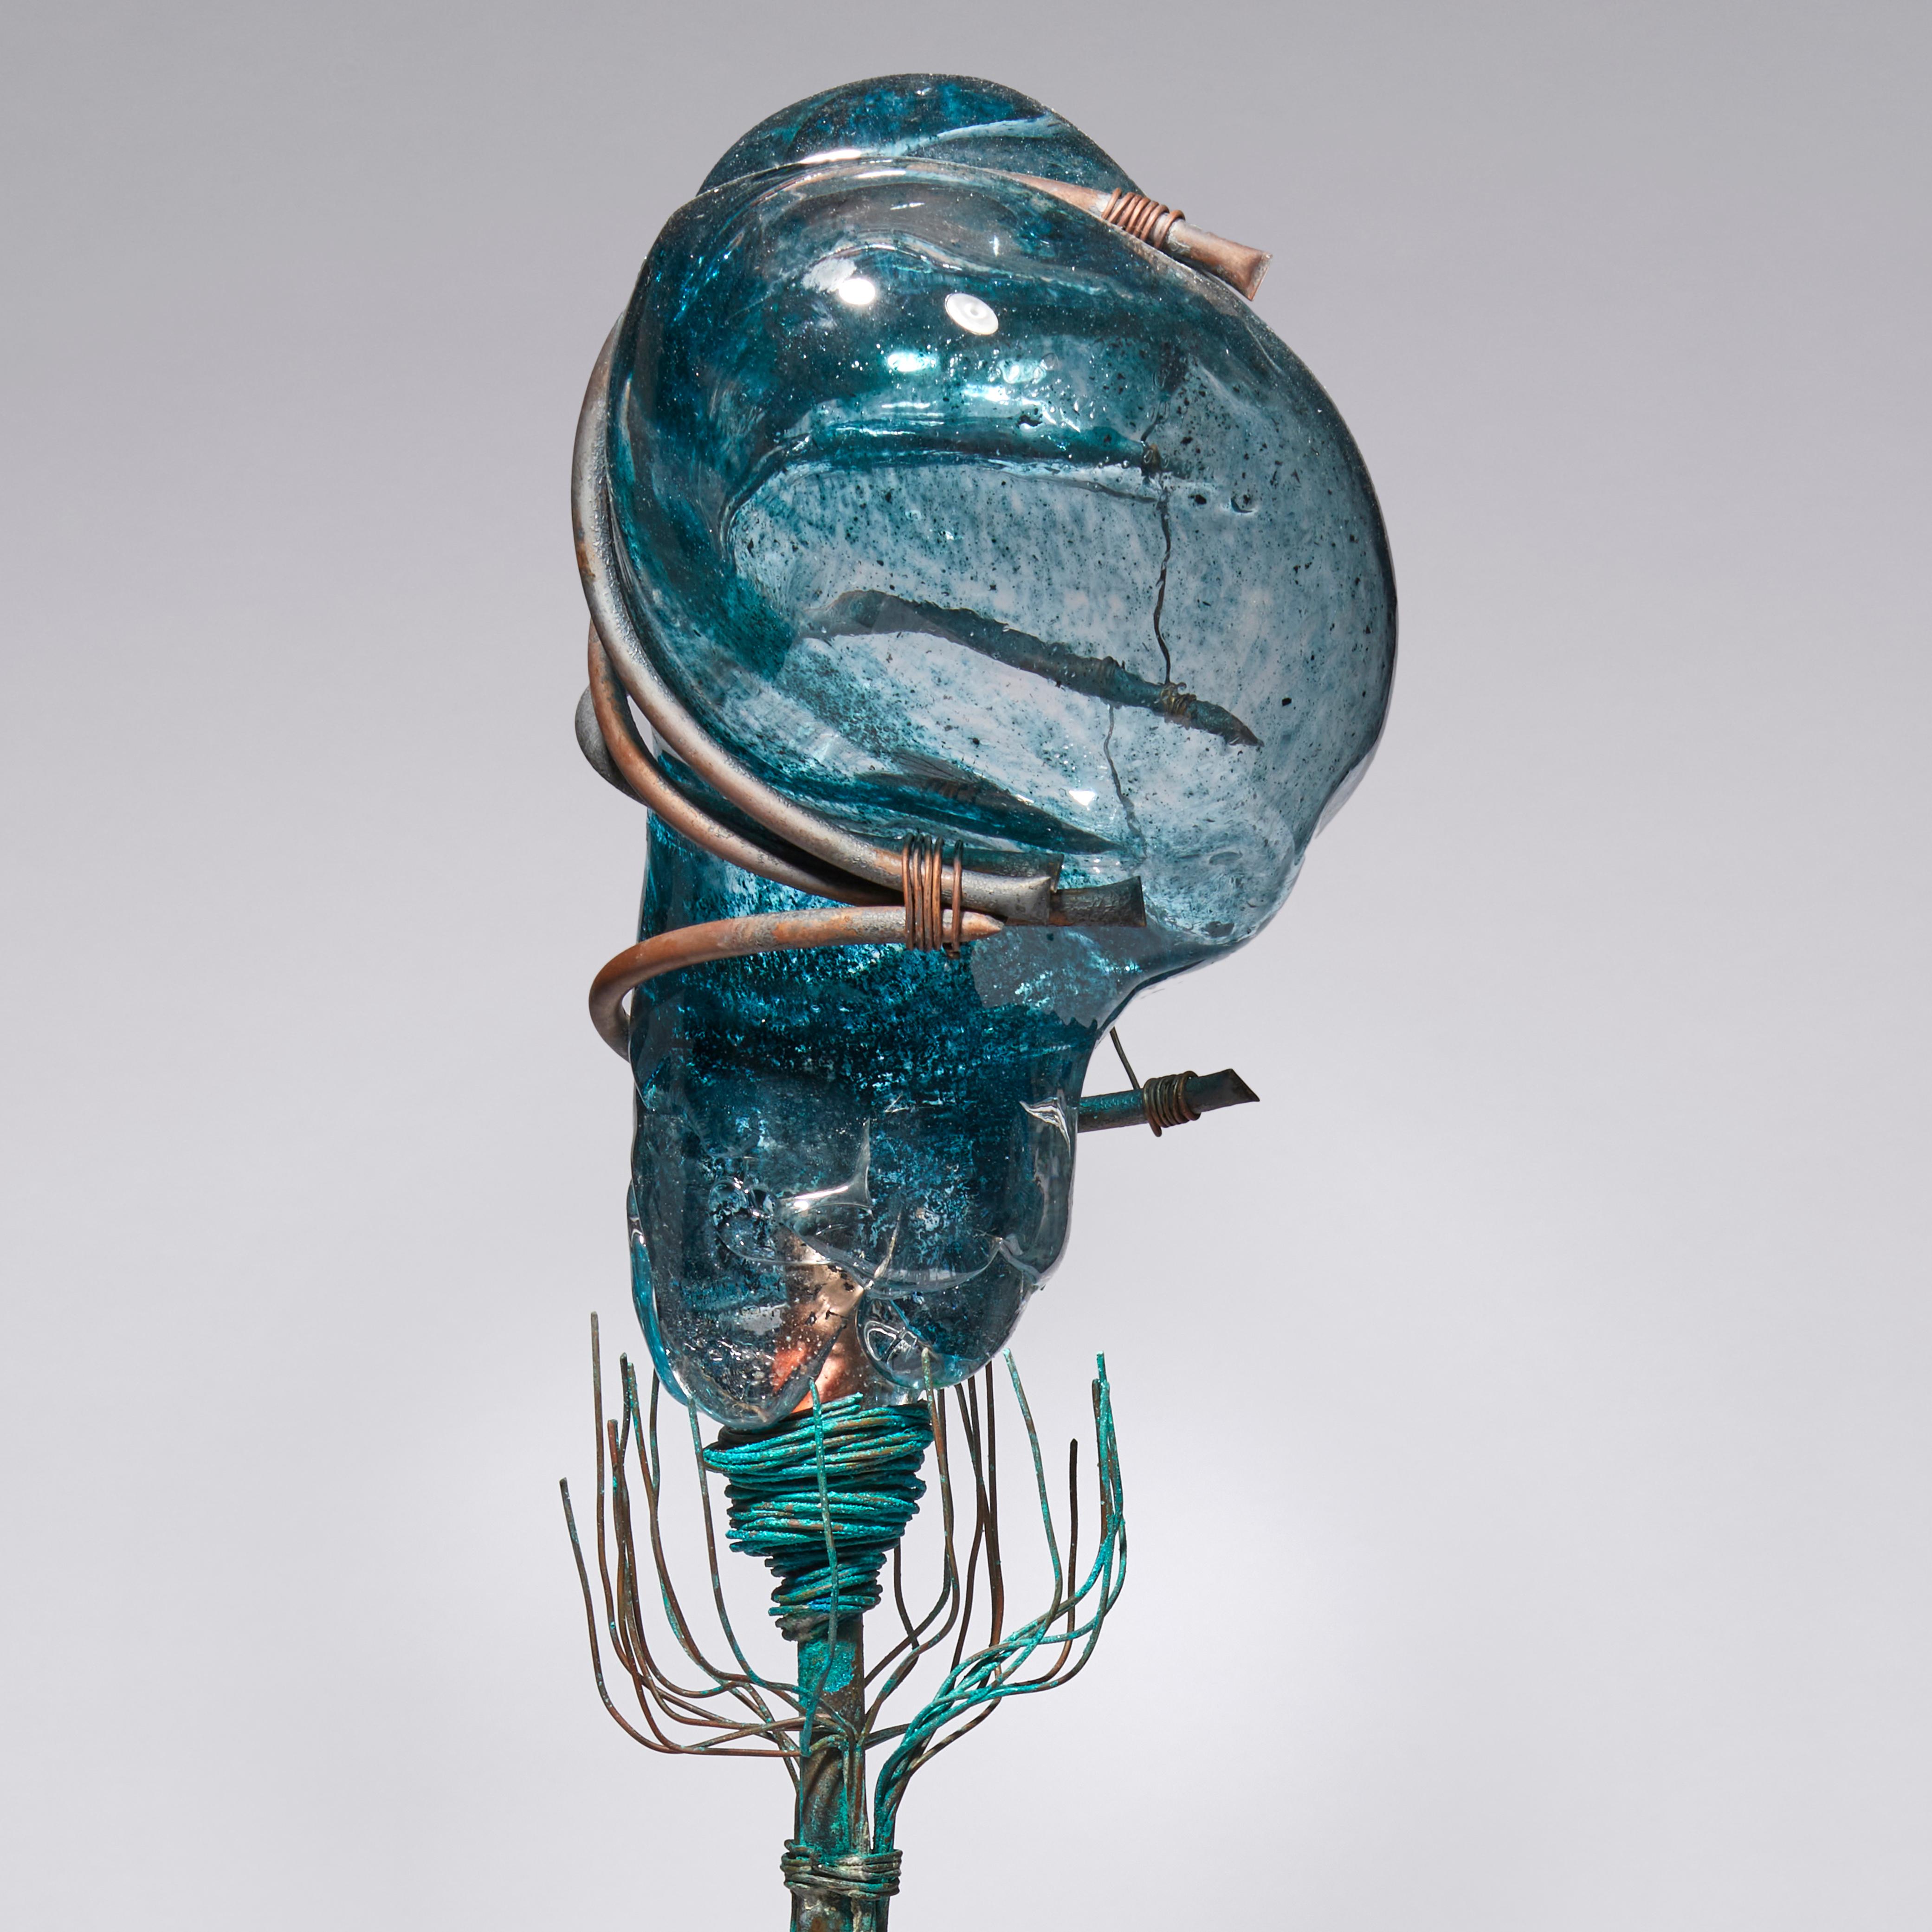 Hand-Crafted Impostor Syndrome, a Unique Glass, Bronze and Copper Sculpture by Chris Day